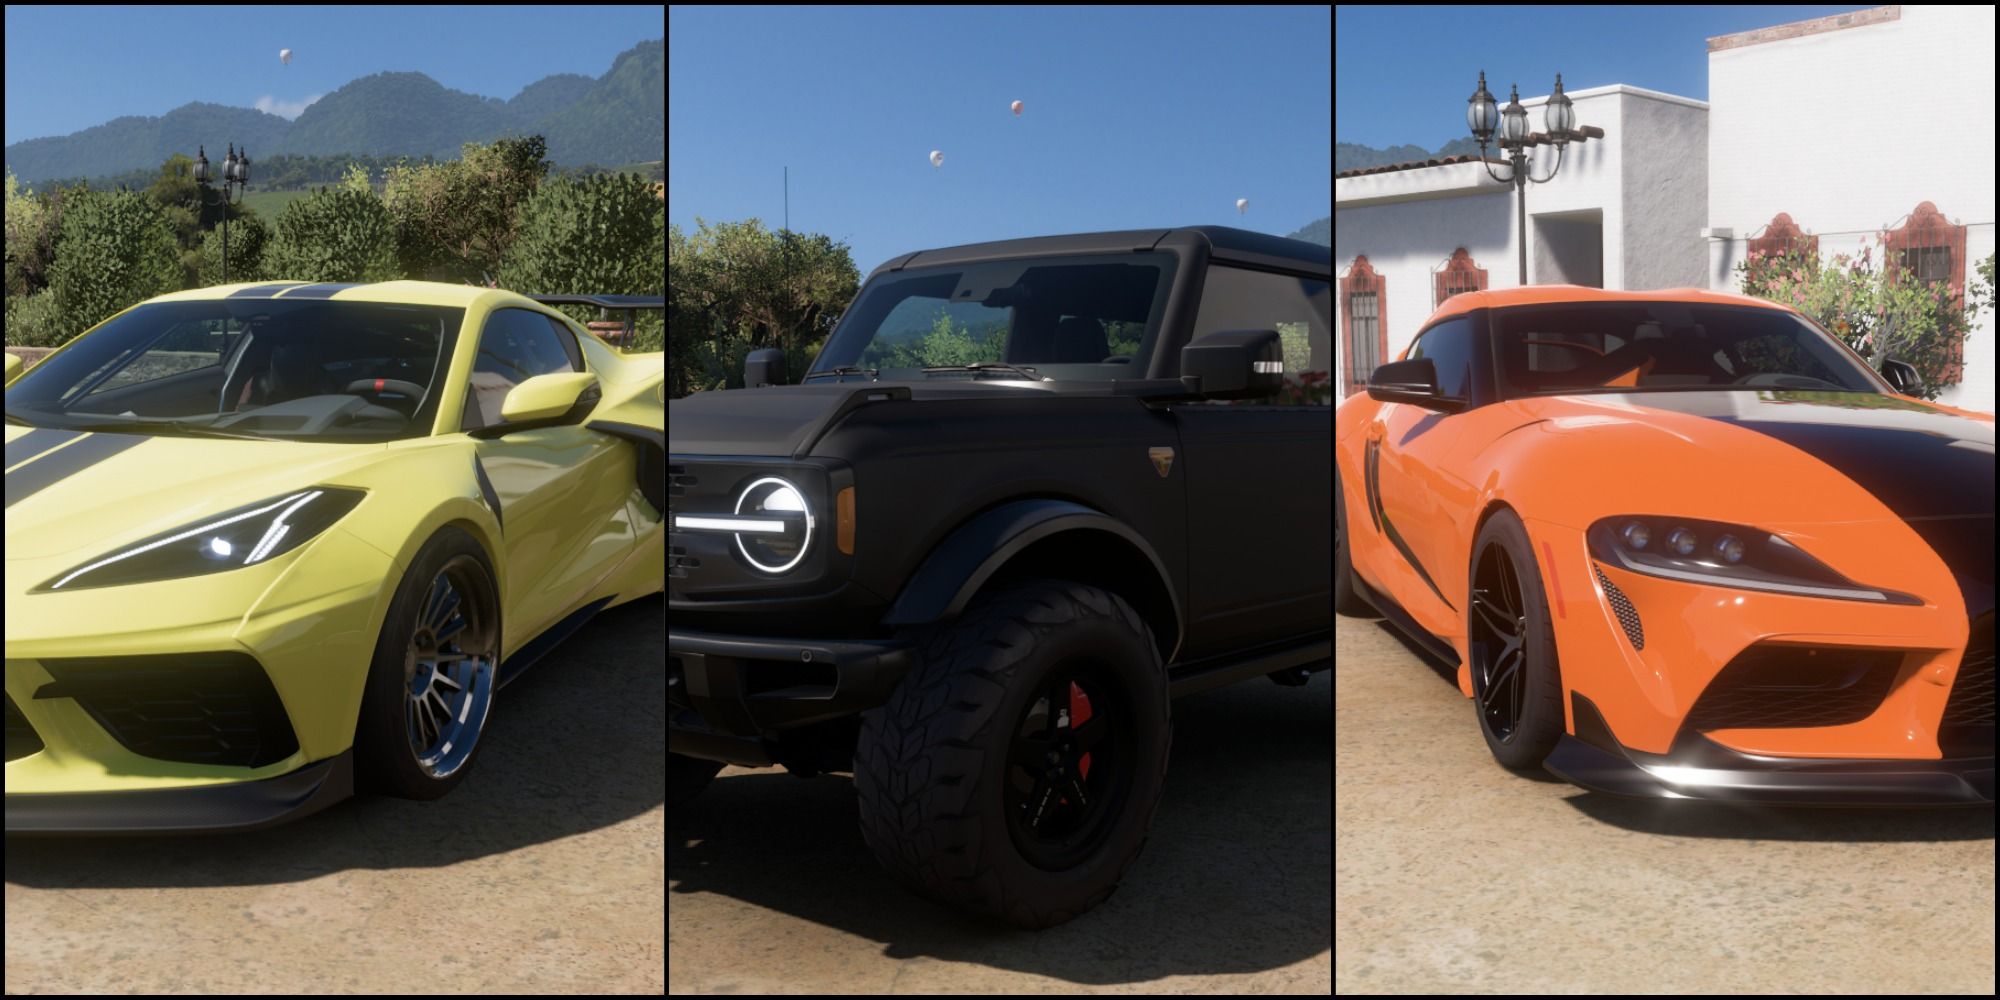 A Chevrolet C8 Corvette Stingray to the left, a Ford Bronco in the middle and a Toyota CR Supra to the right